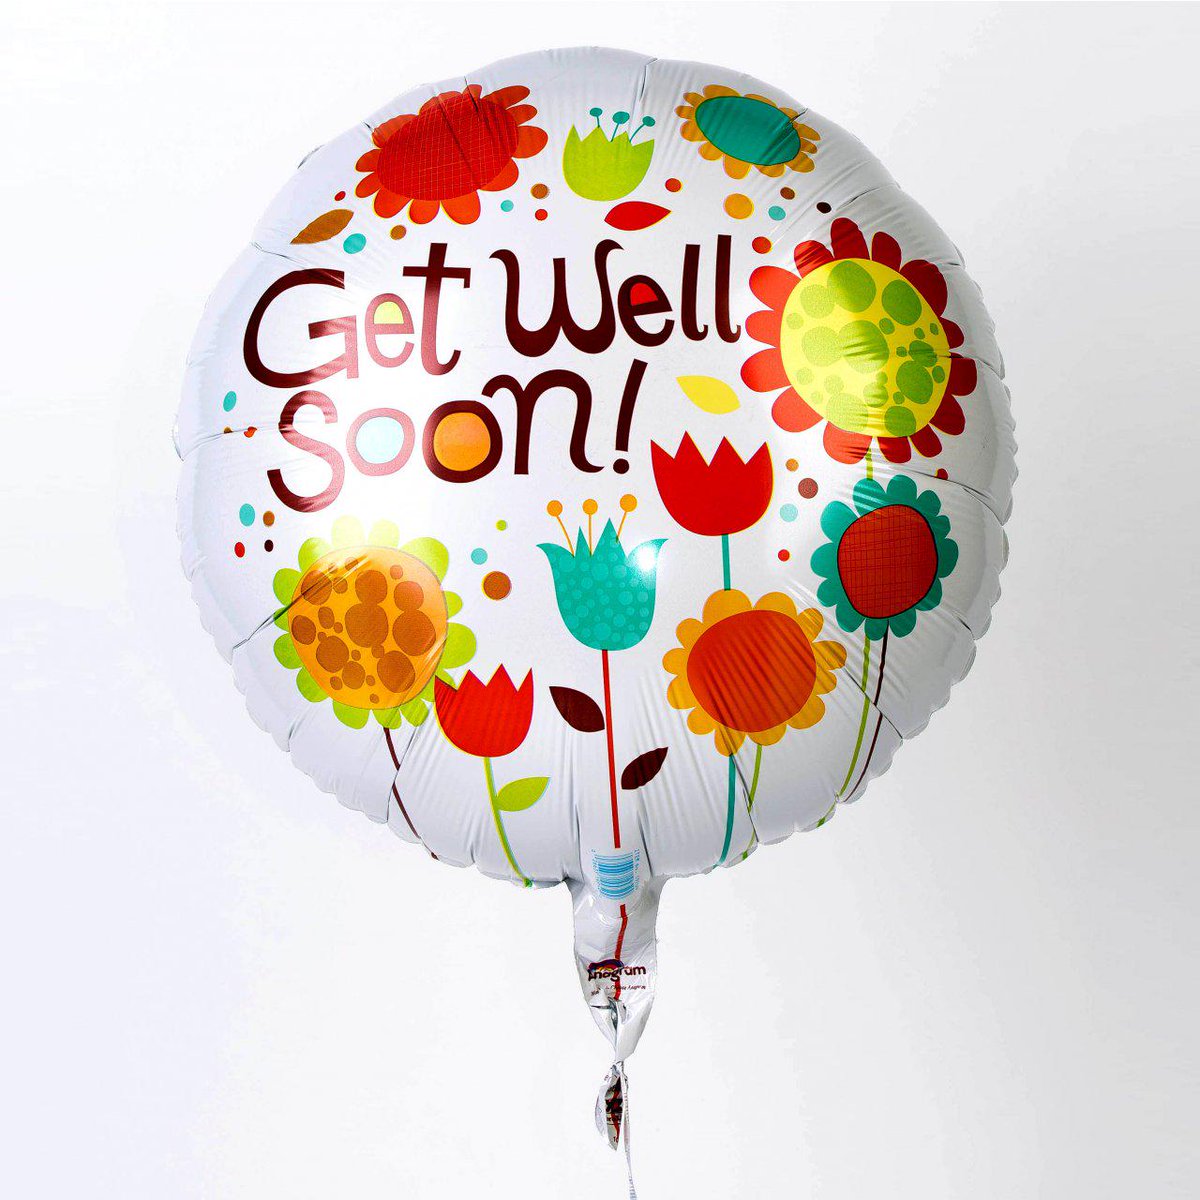 Get better picture. Get well soon. Открытка get well soon. Get well картинки. Greeting Cards get well soon.